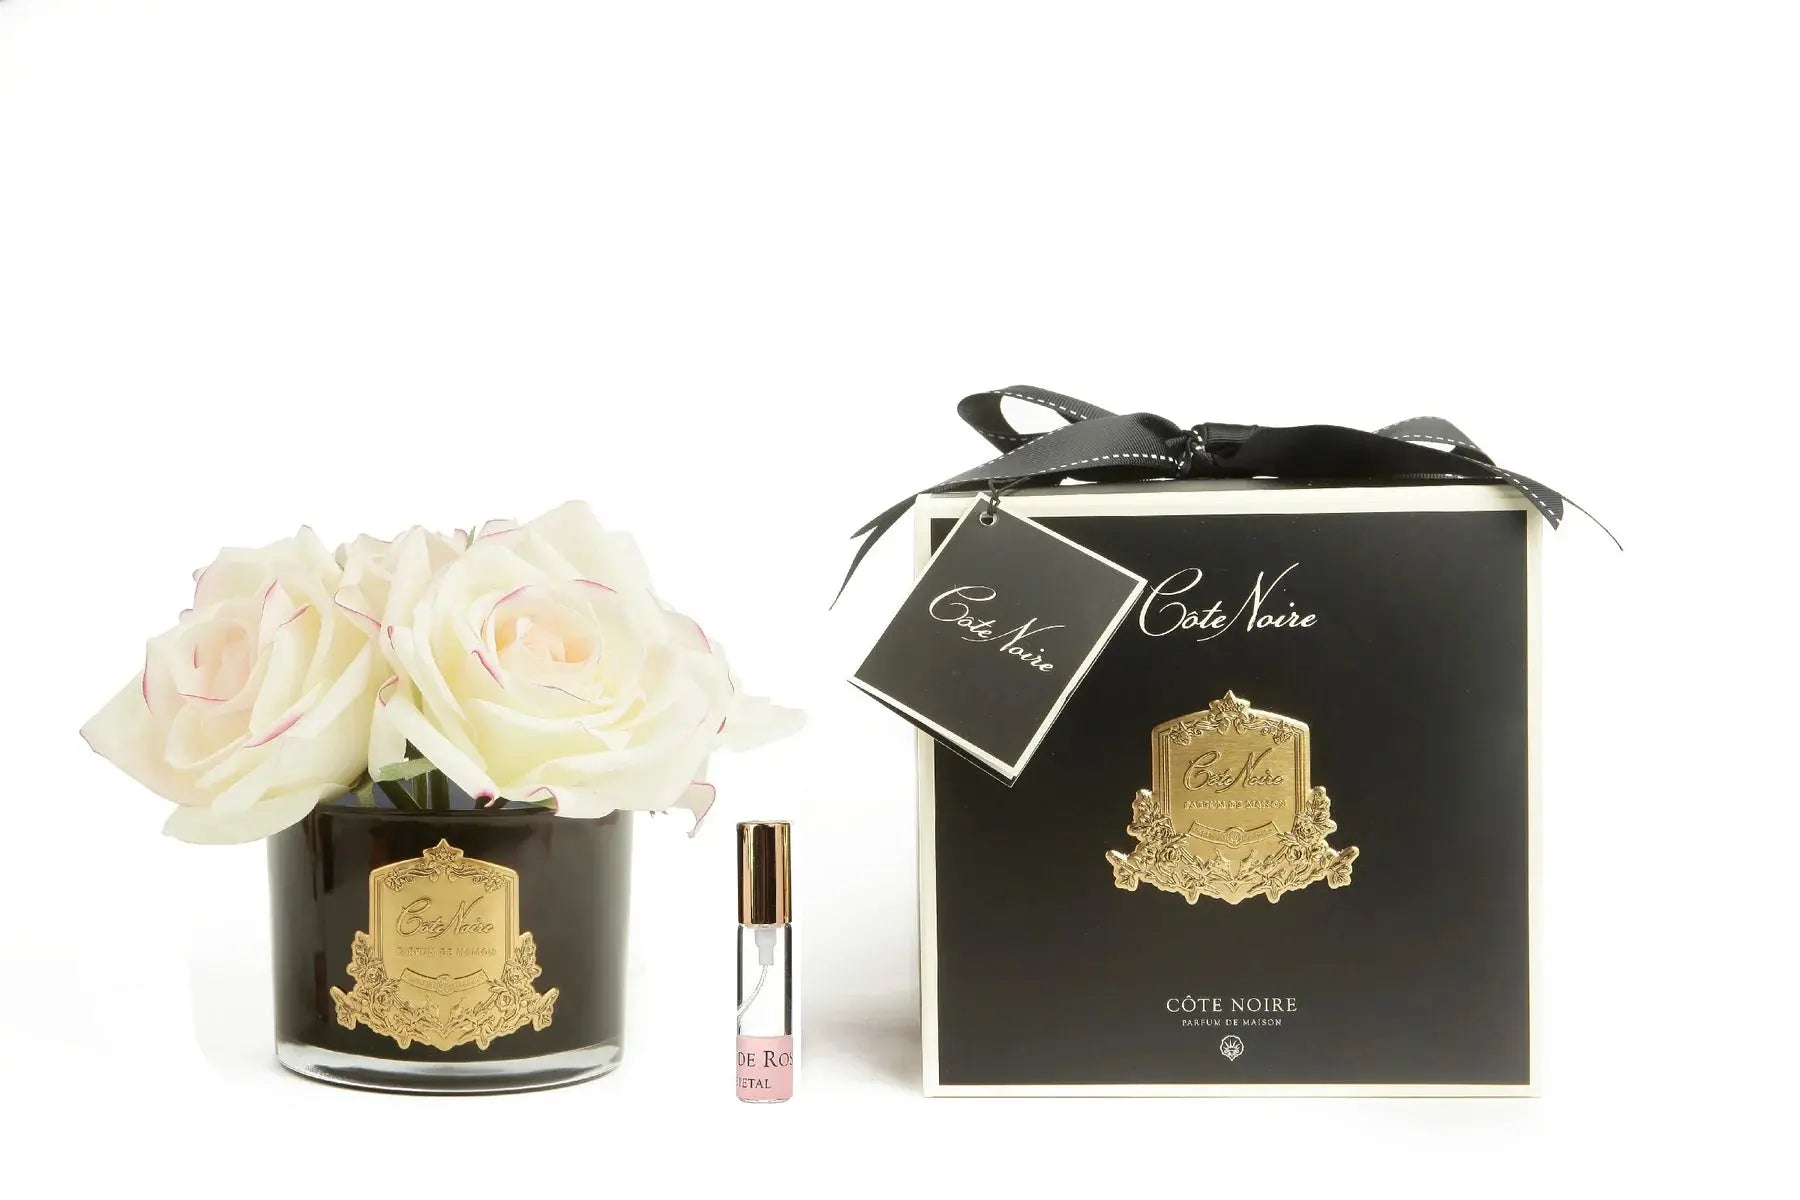 The image features a luxurious product arrangement against a white background. On the left, there is a black glass vase filled with several light pink roses, the vase adorned with a gold label reading "Cote Noire Bougie de Jardinia." Beside the vase, there is a small, elegant perfume roller with a clear body and a gold cap, labelled similarly. On the right side of the image, there's a sleek black gift box with a golden crest design, tied with a black ribbon and a gift tag that reads "Cote Noire."